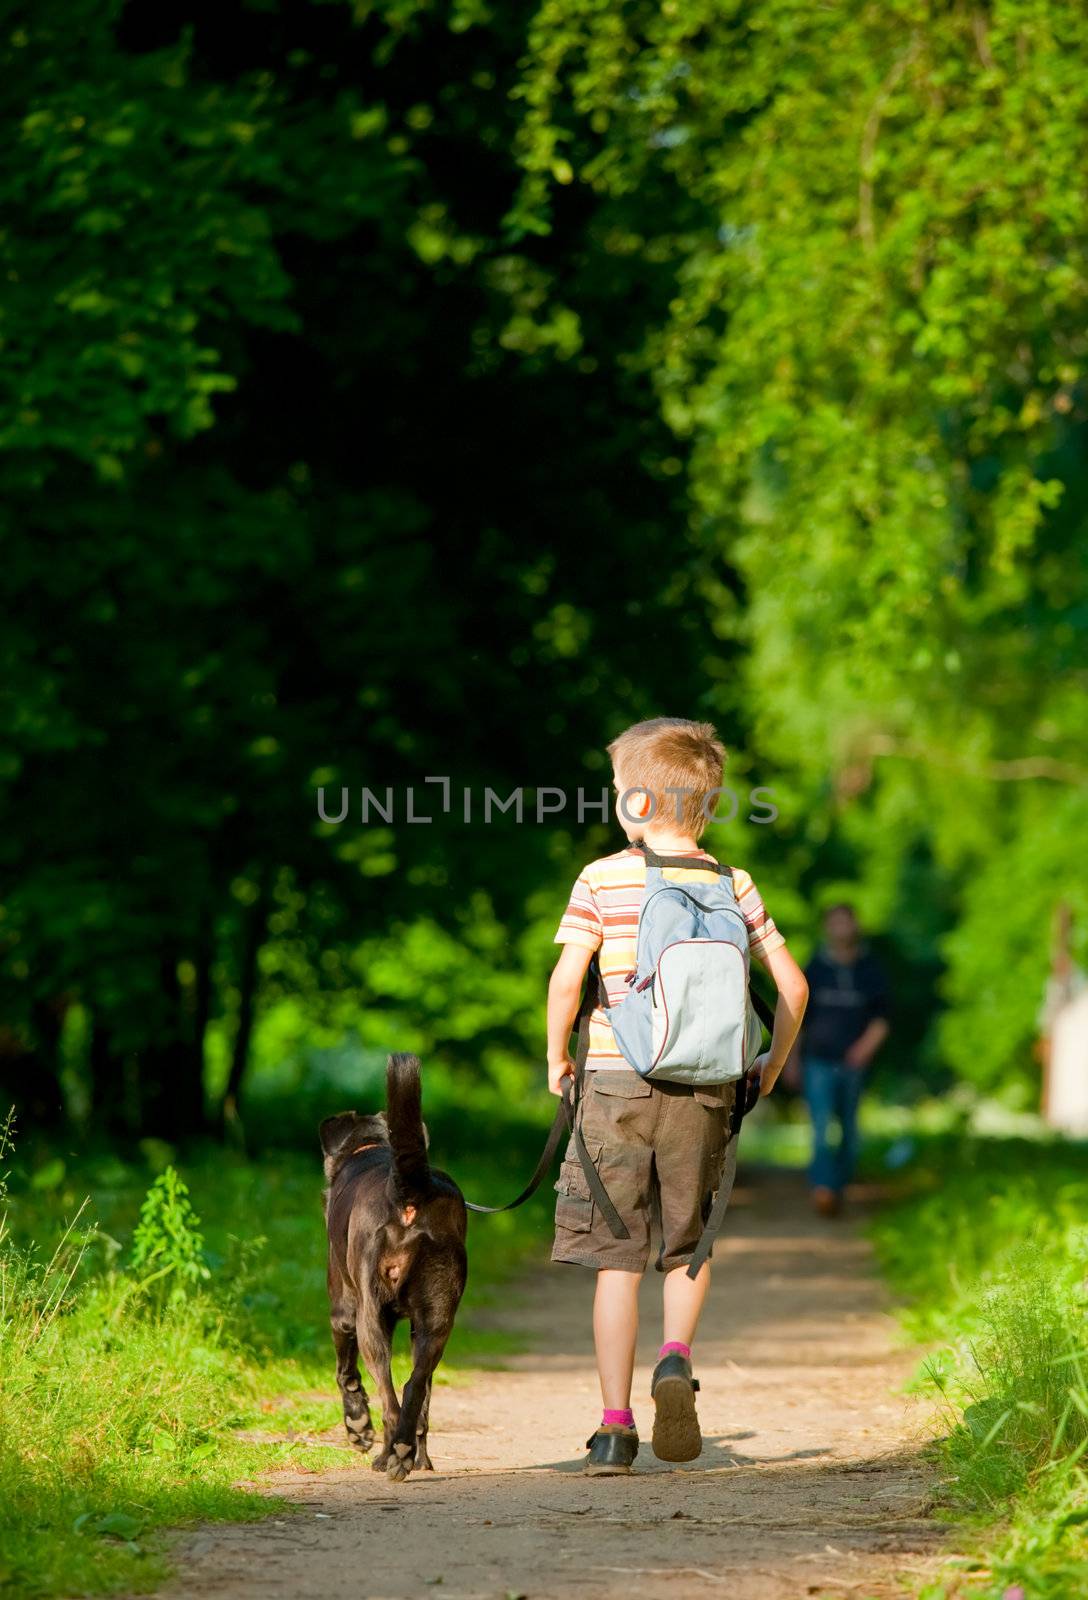 Kid with a dog by naumoid